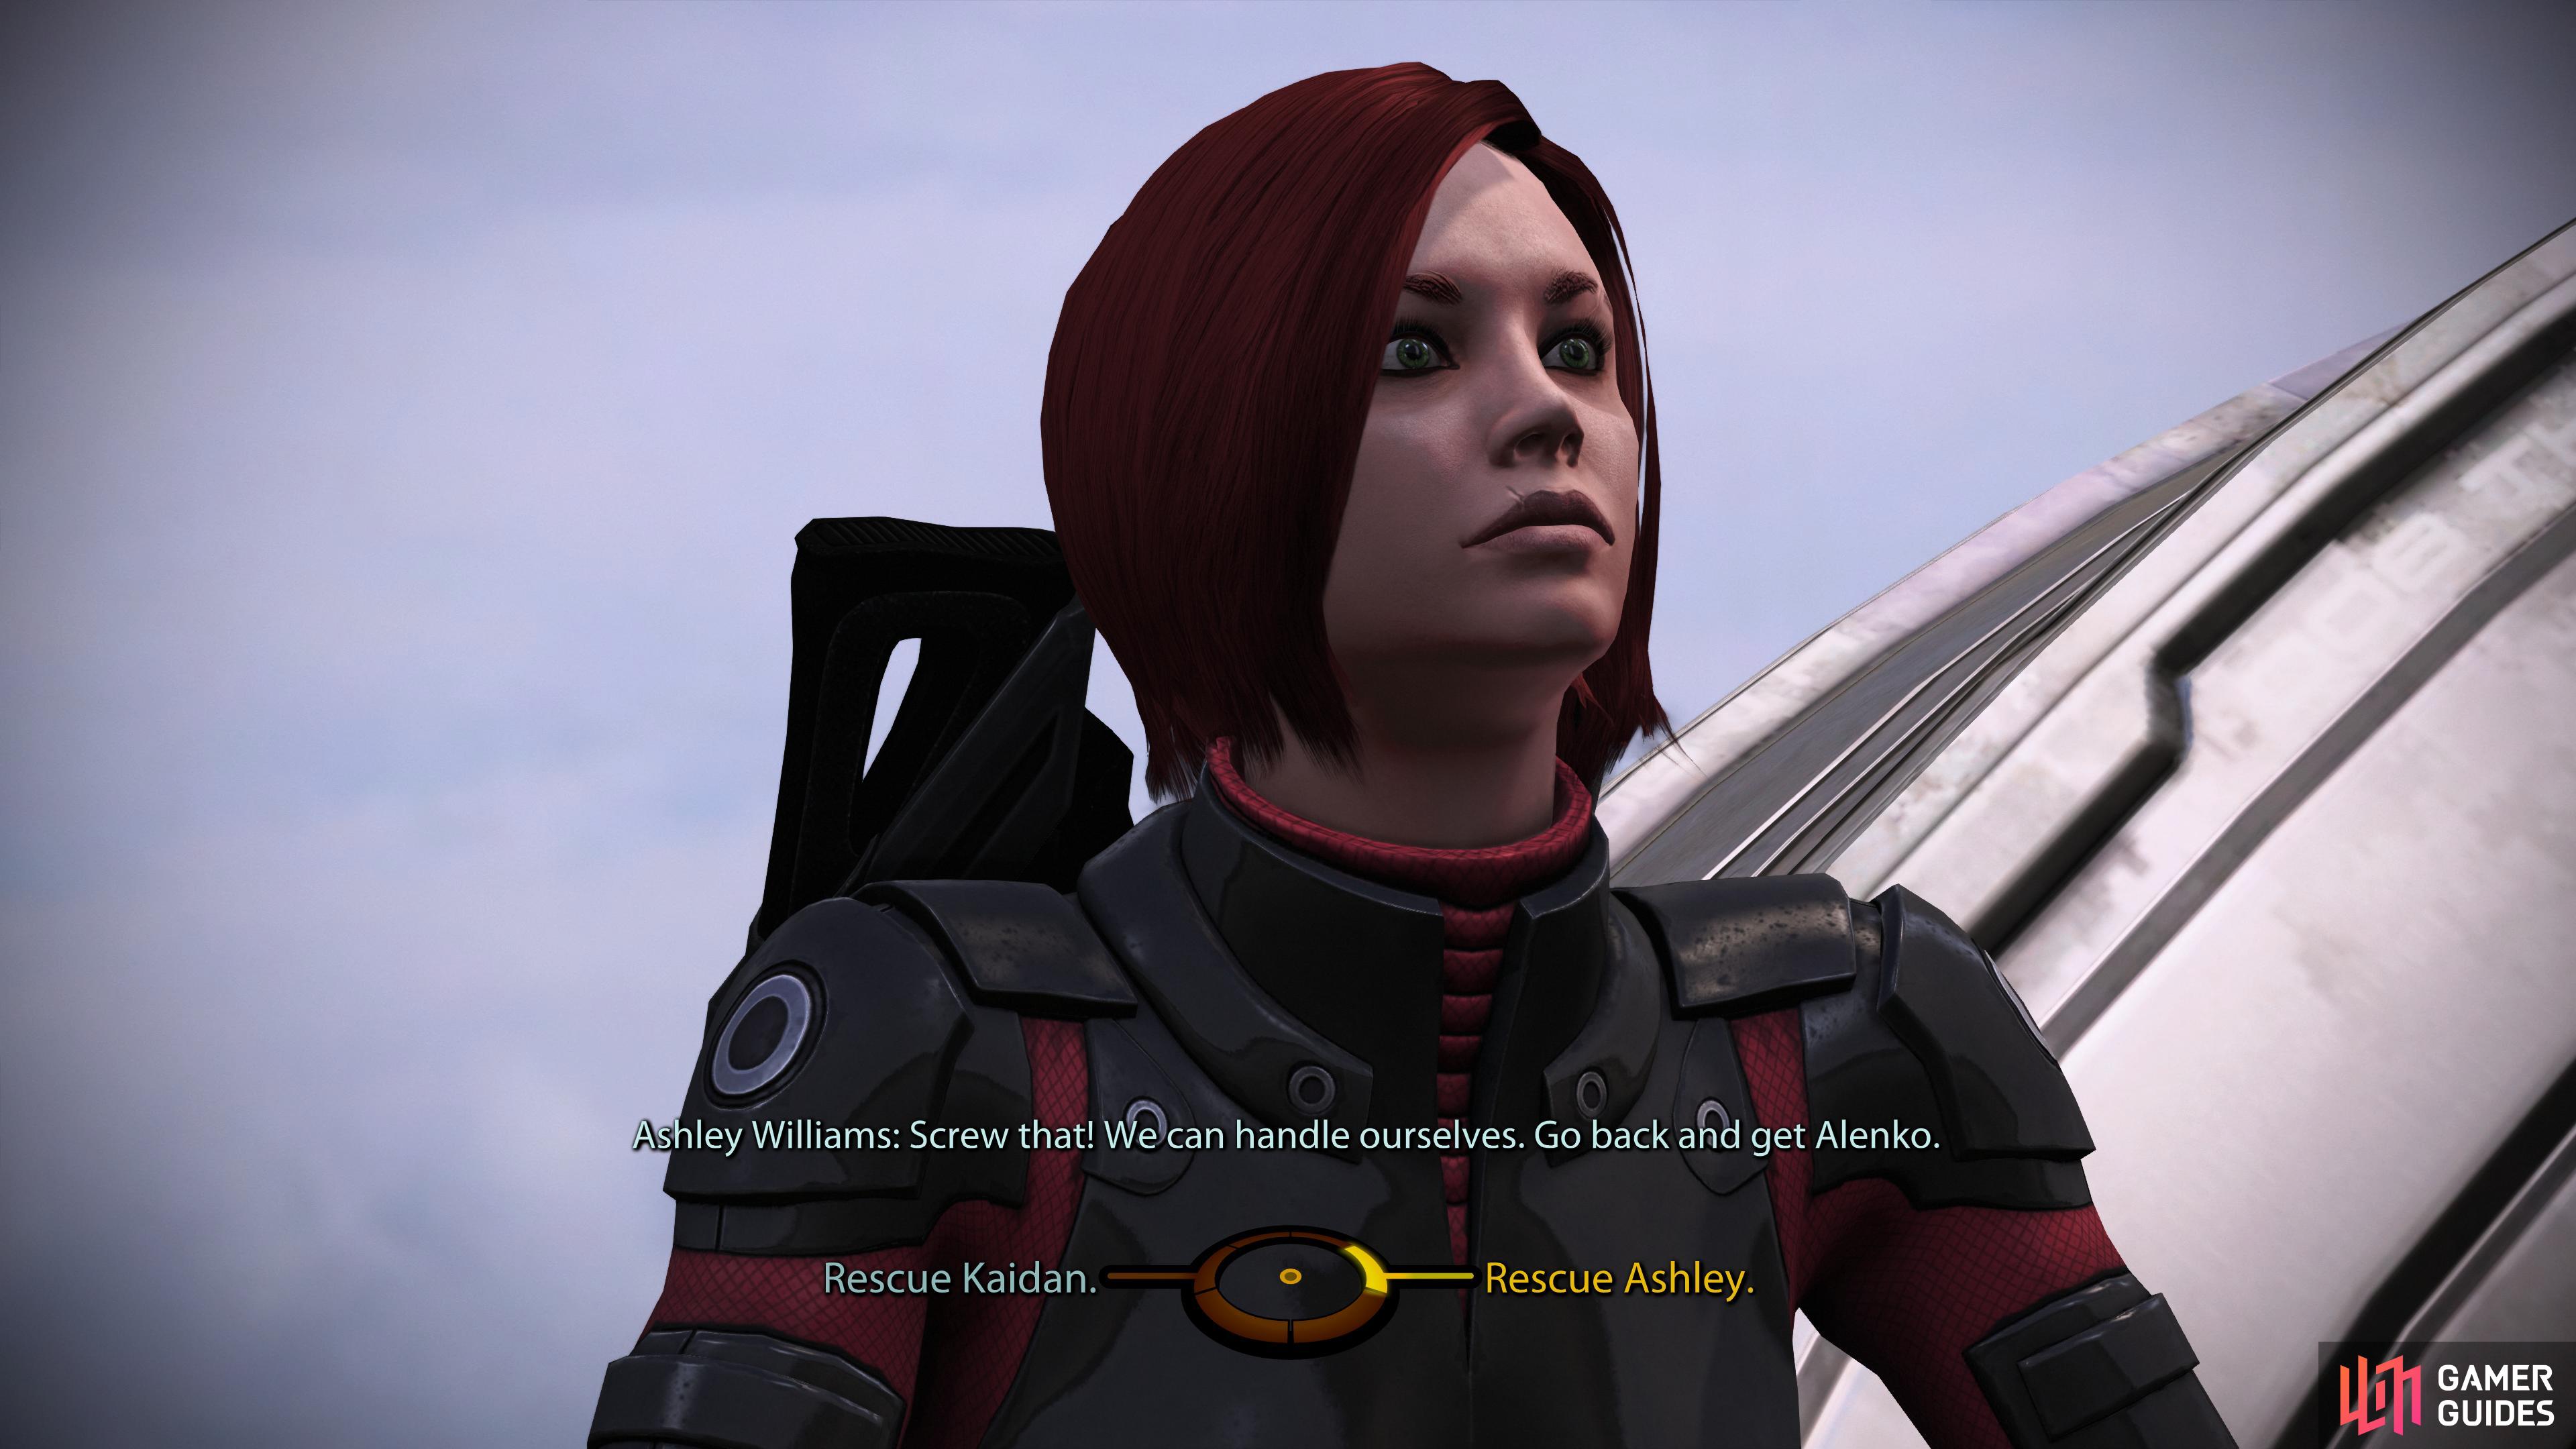 When you approach the AA Tower, you’ll get more bad news, forcing you to choose between rescuing Kaiden or Ashley.